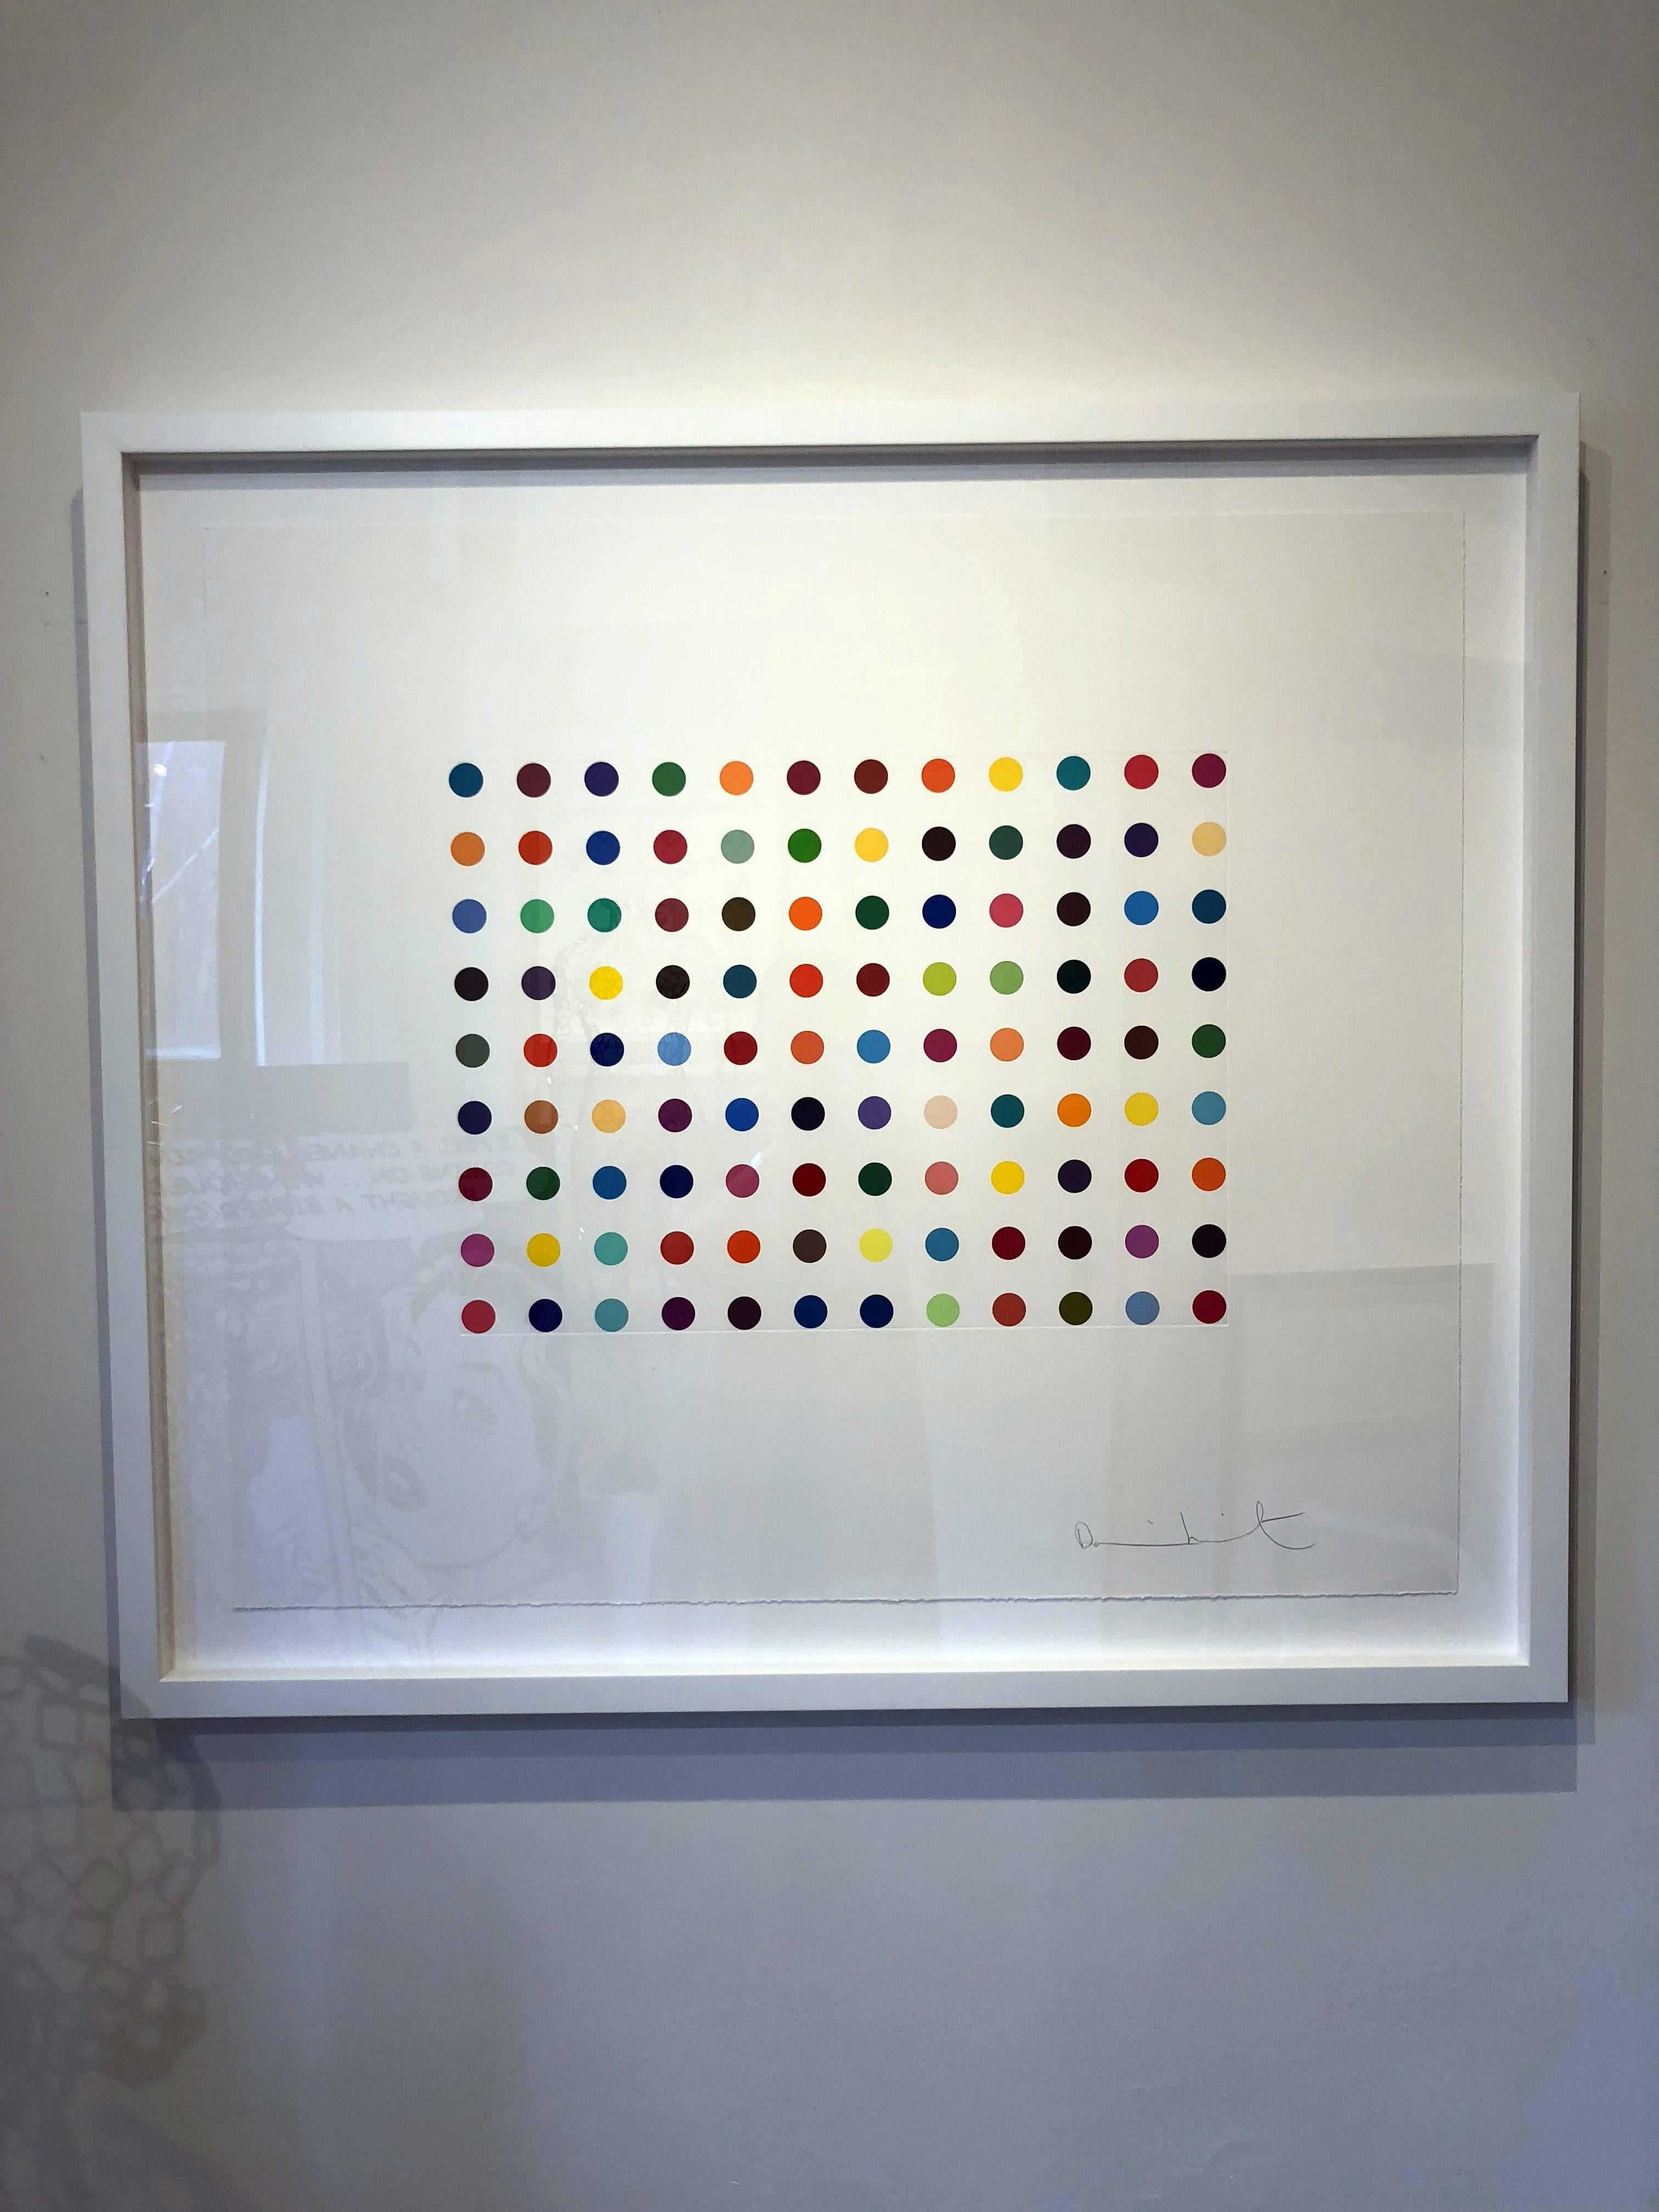 Doxylamine - Contemporary Print by Damien Hirst